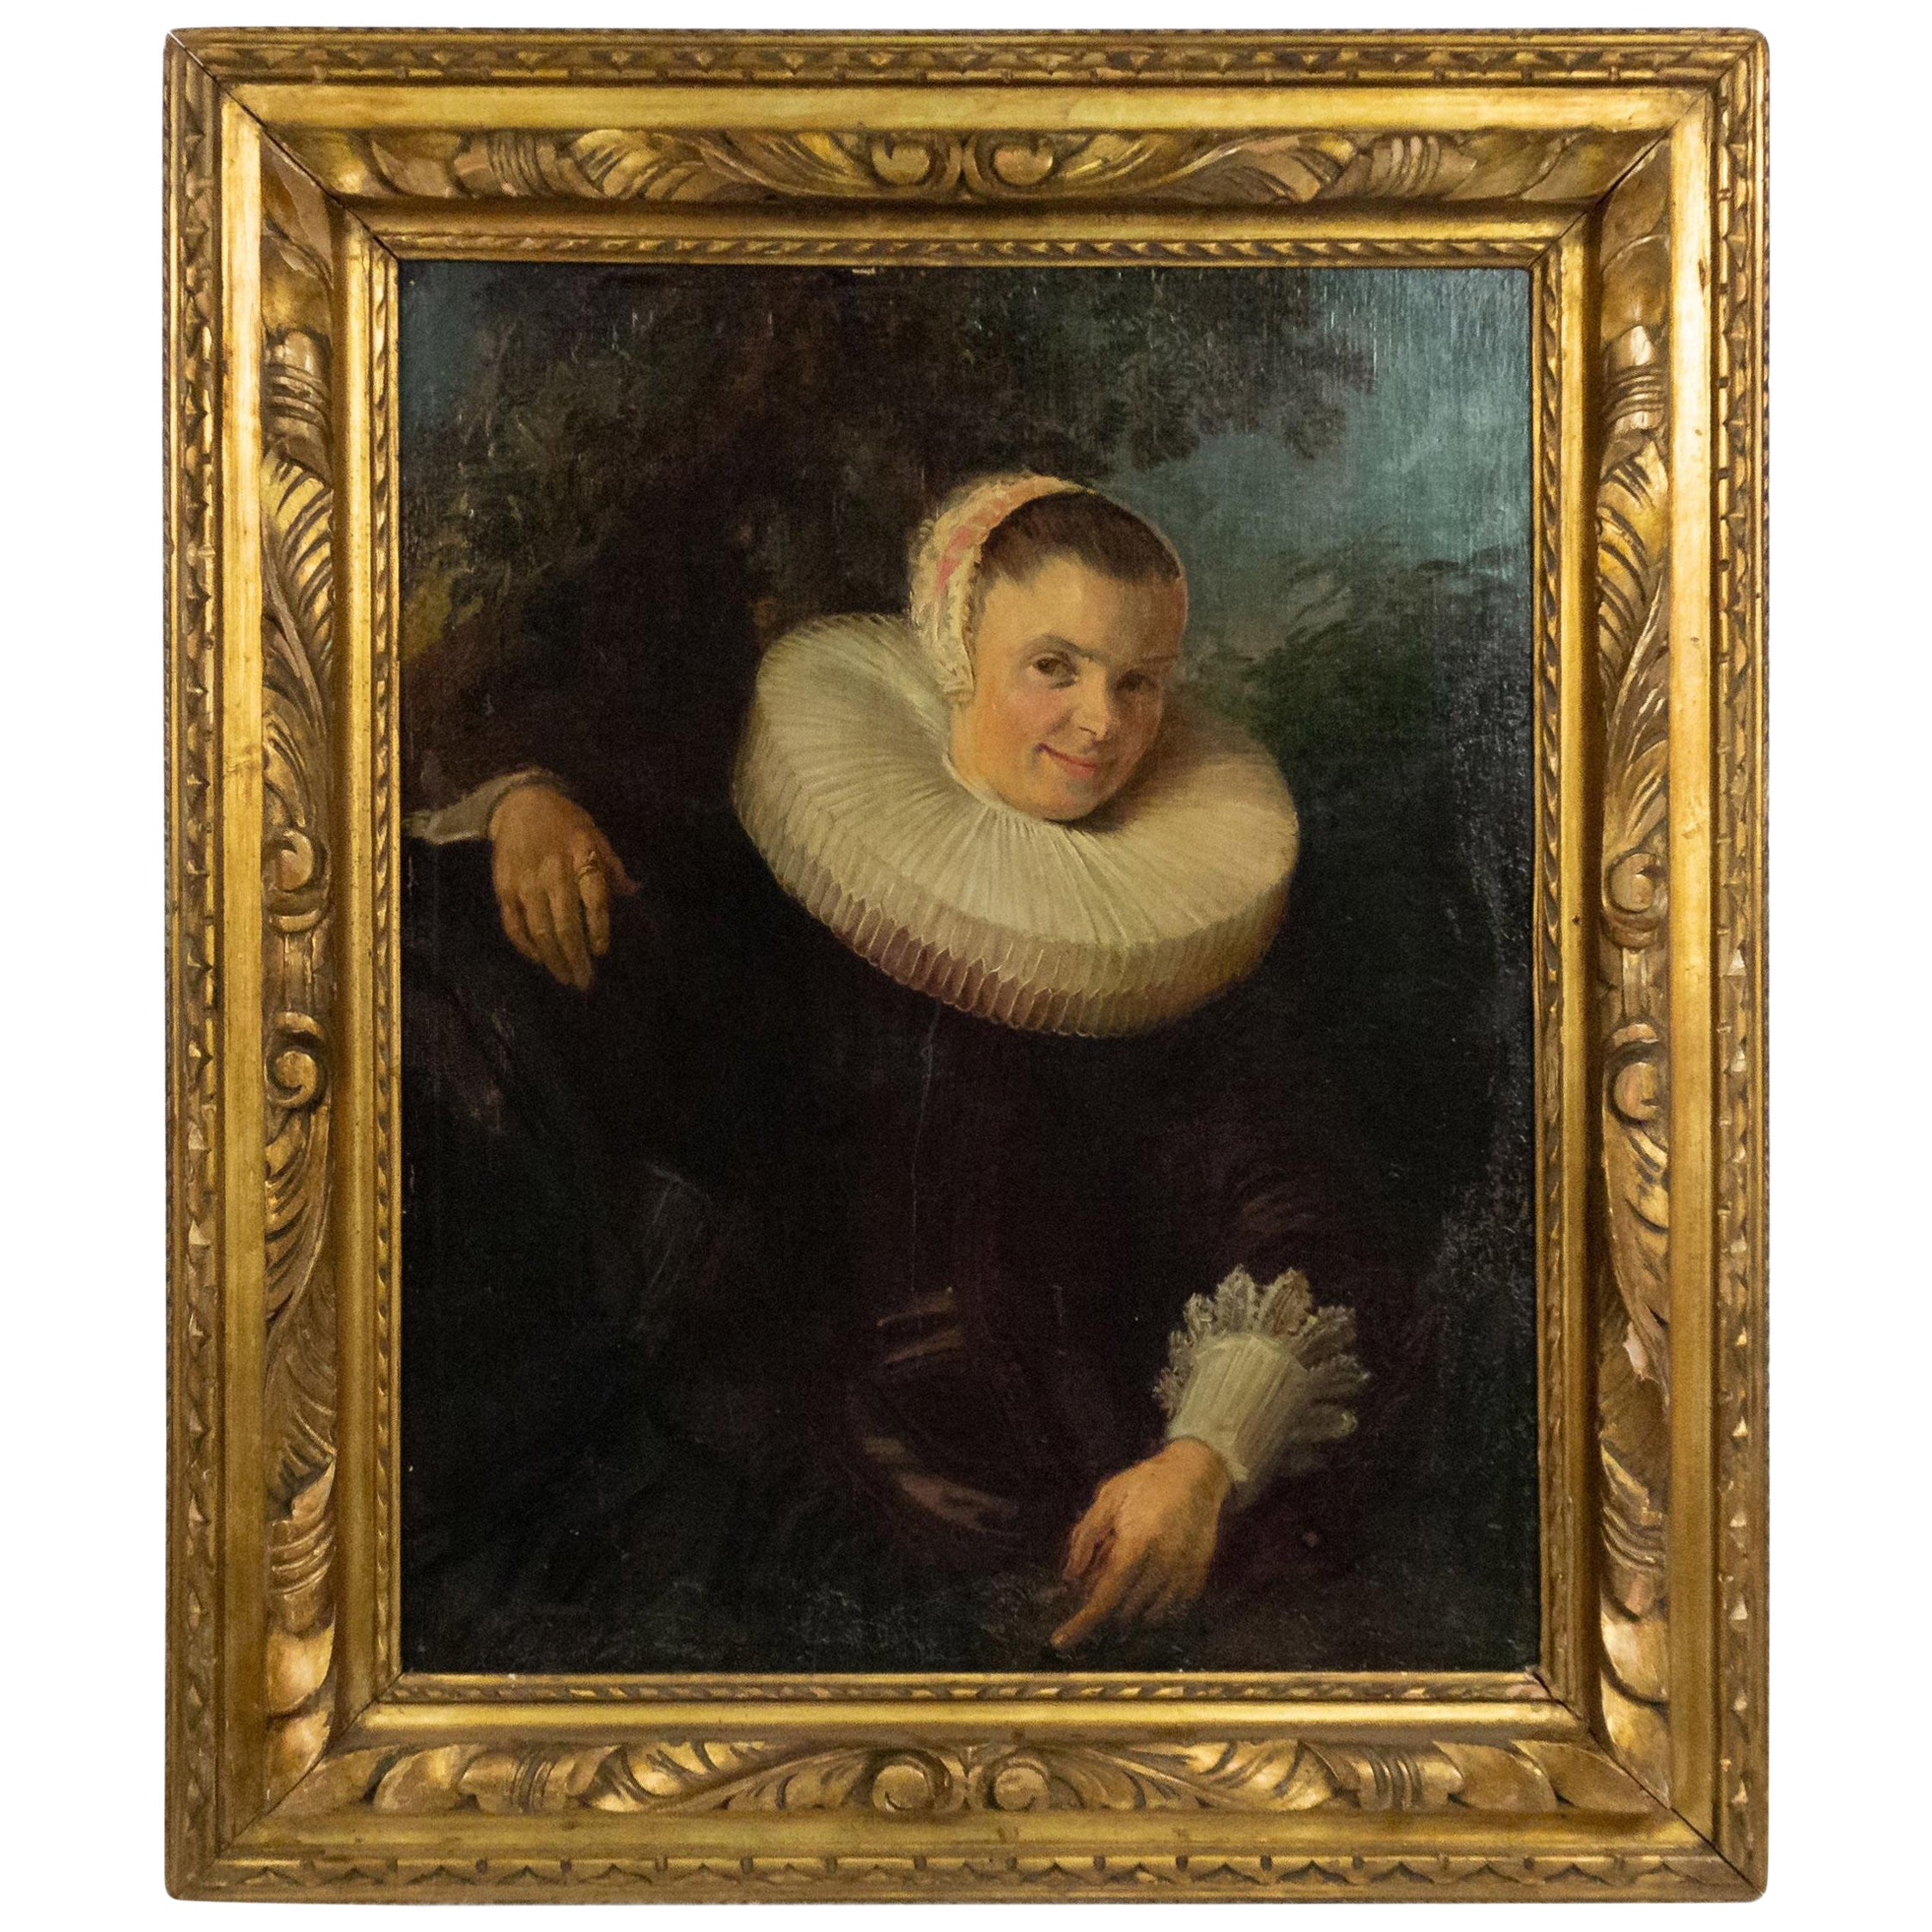 20th Century Dutch Portrait Framed of a Woman in a Bonnet and Ruff